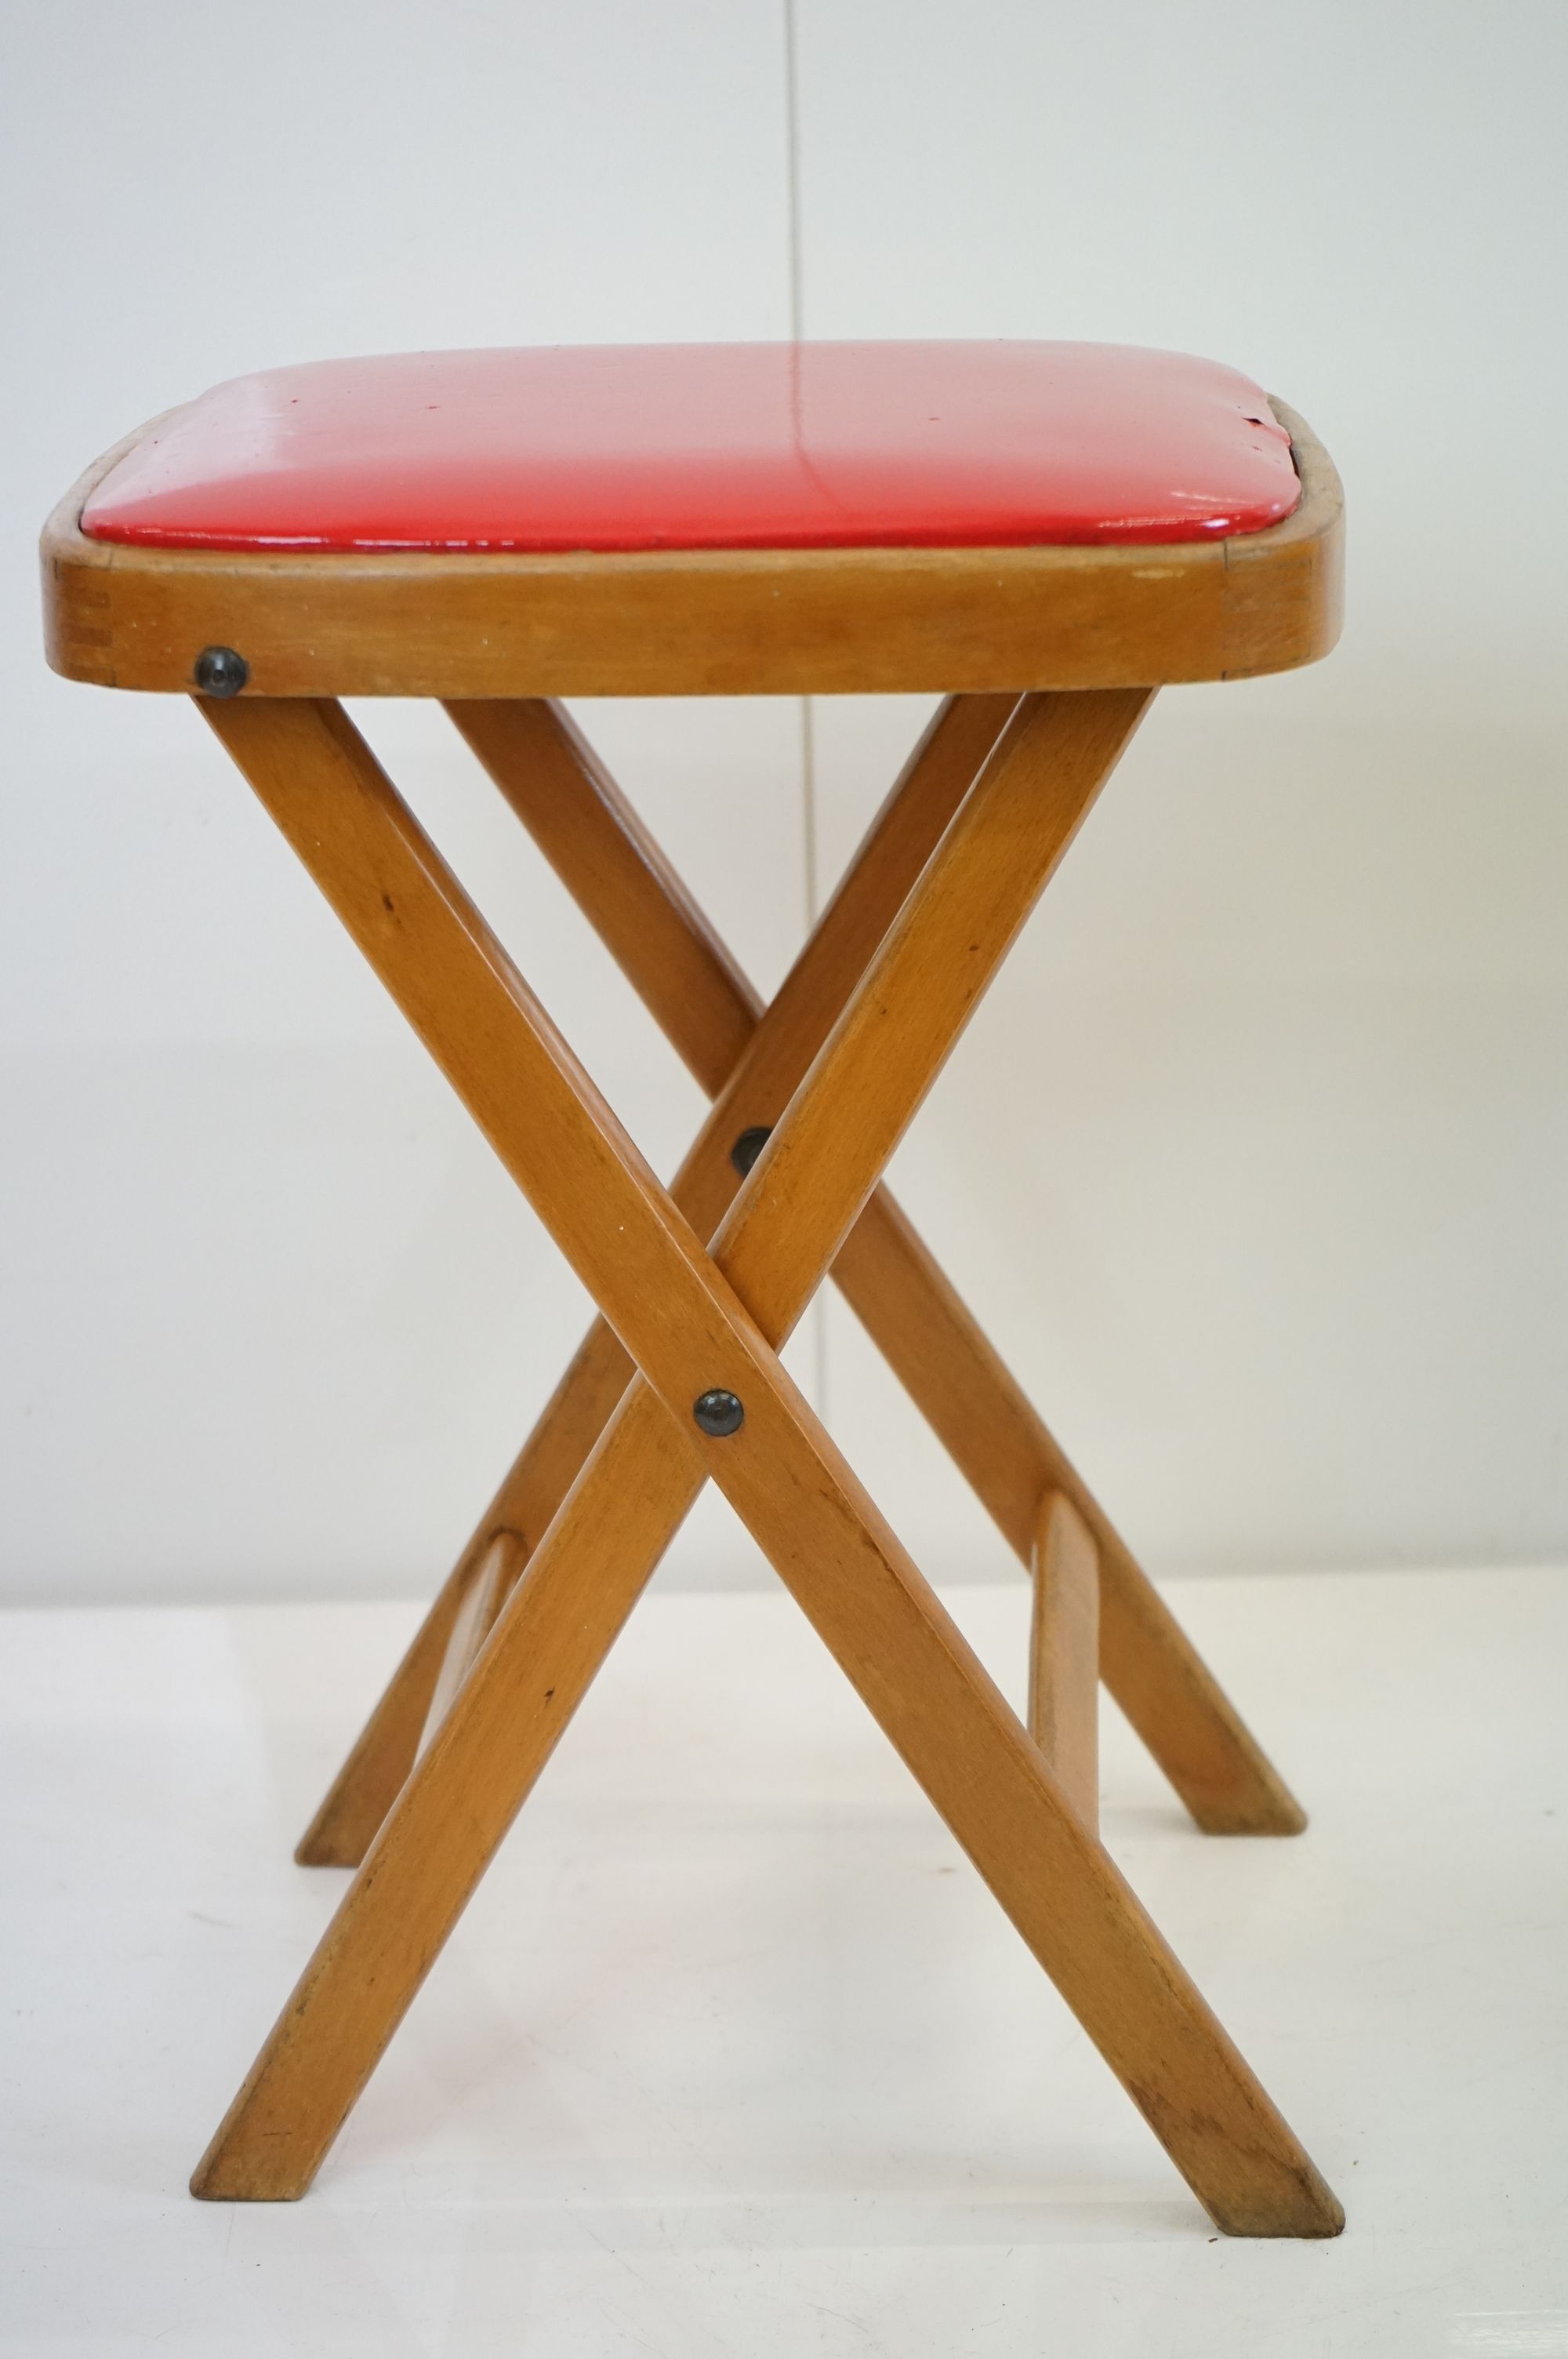 Pair of 1960s folding kitchen stools, 50cm high - Image 6 of 11